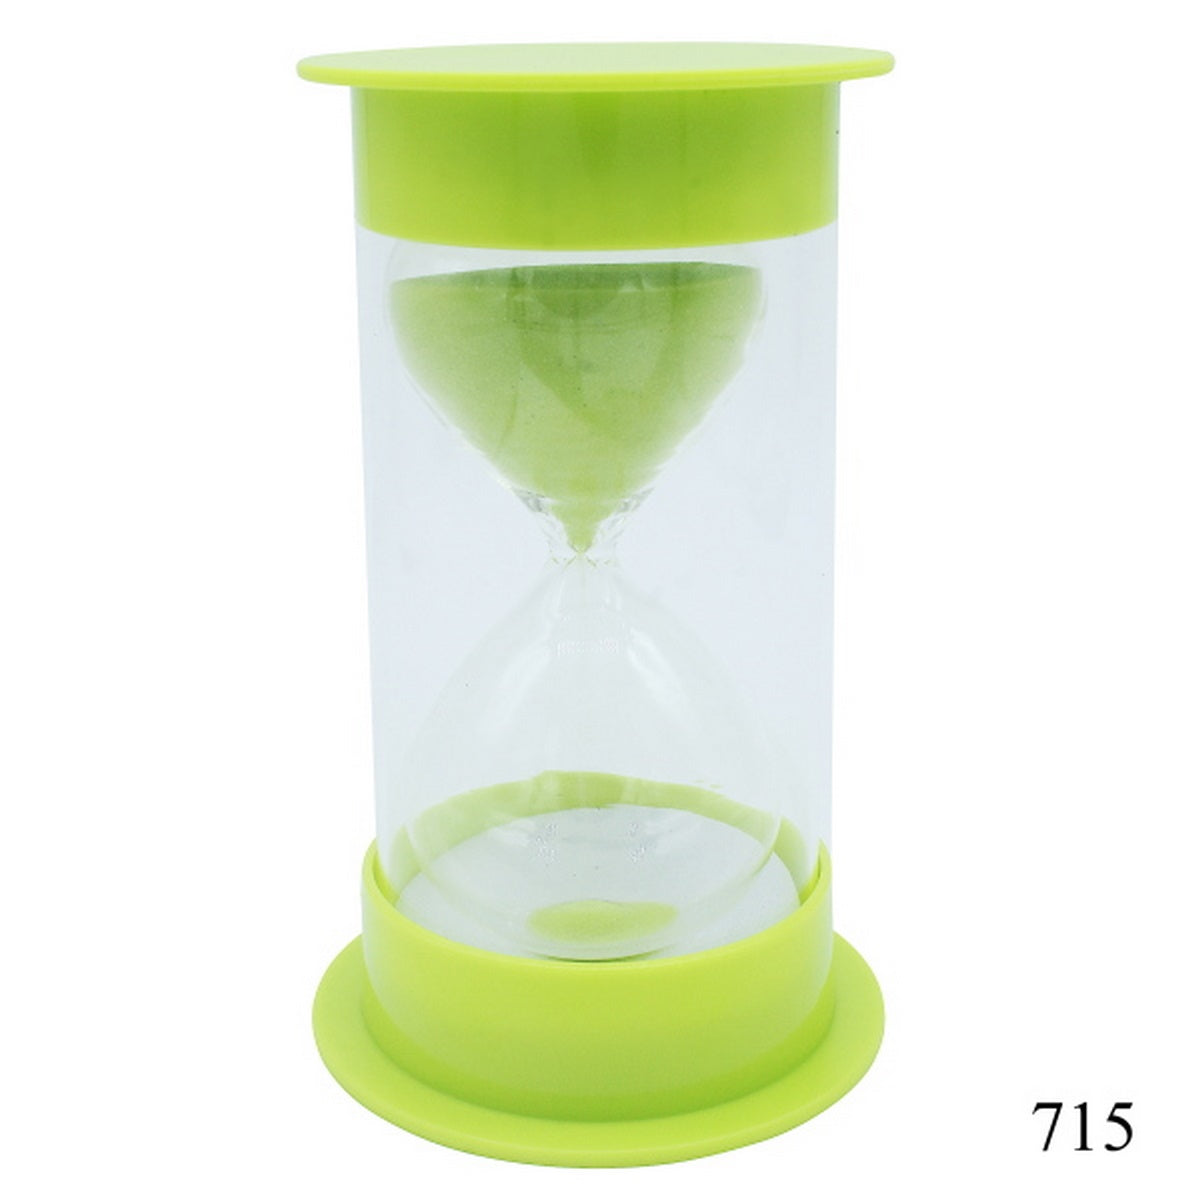 jags-mumbai Sand Timer Sand Timer Plastic Round Double Glass  Minute 715